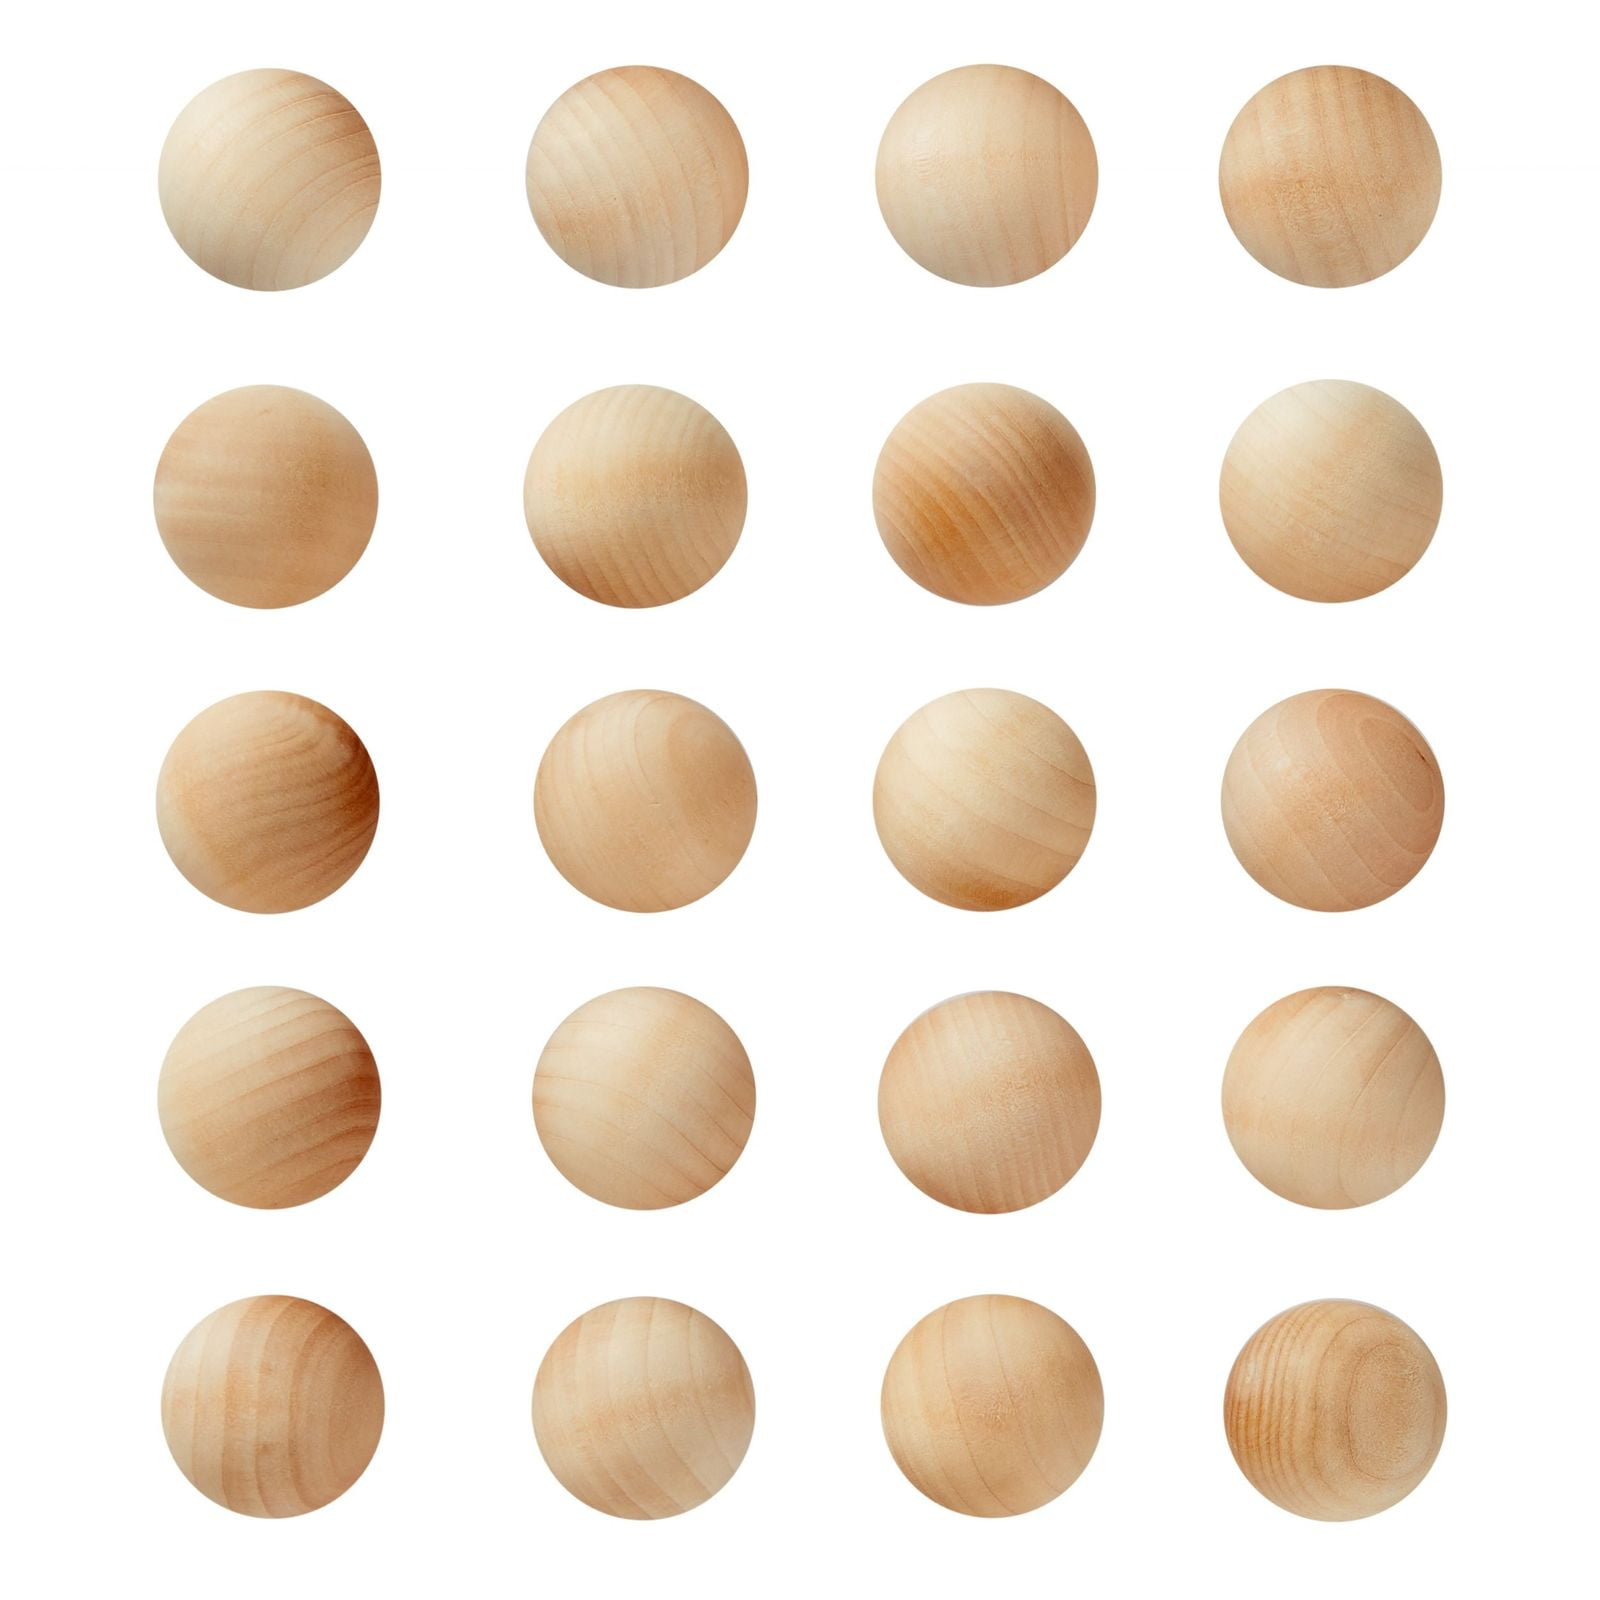 Details about   88 Pieces Wood Ball Wood Craft Balls Unfinished Round Wooden Balls For Diy Craft 